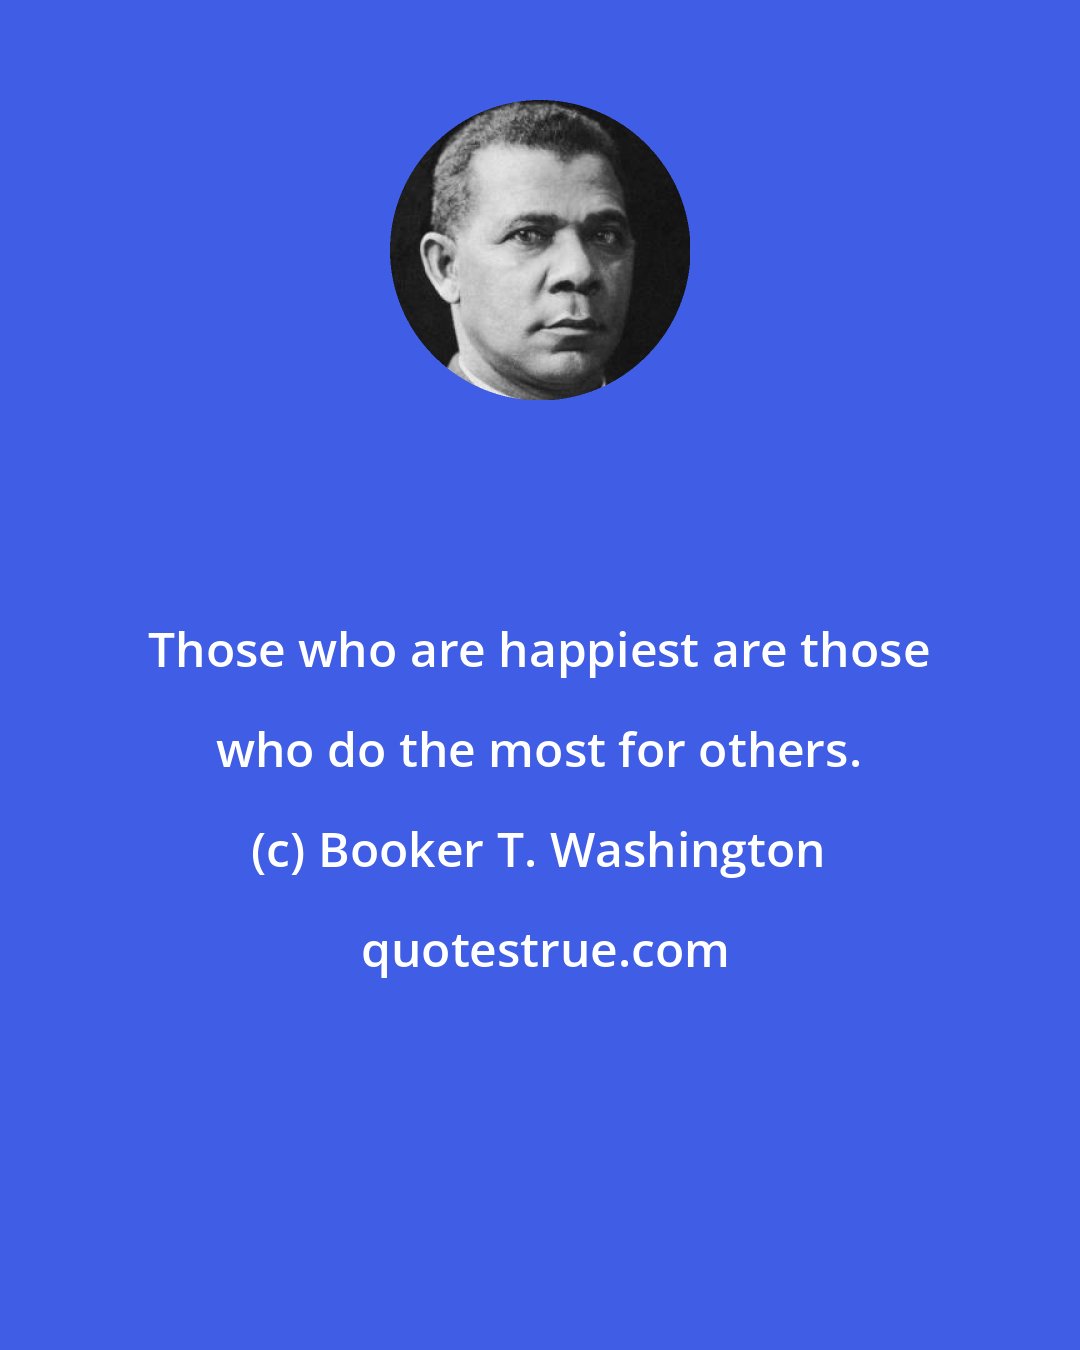 Booker T. Washington: Those who are happiest are those who do the most for others.